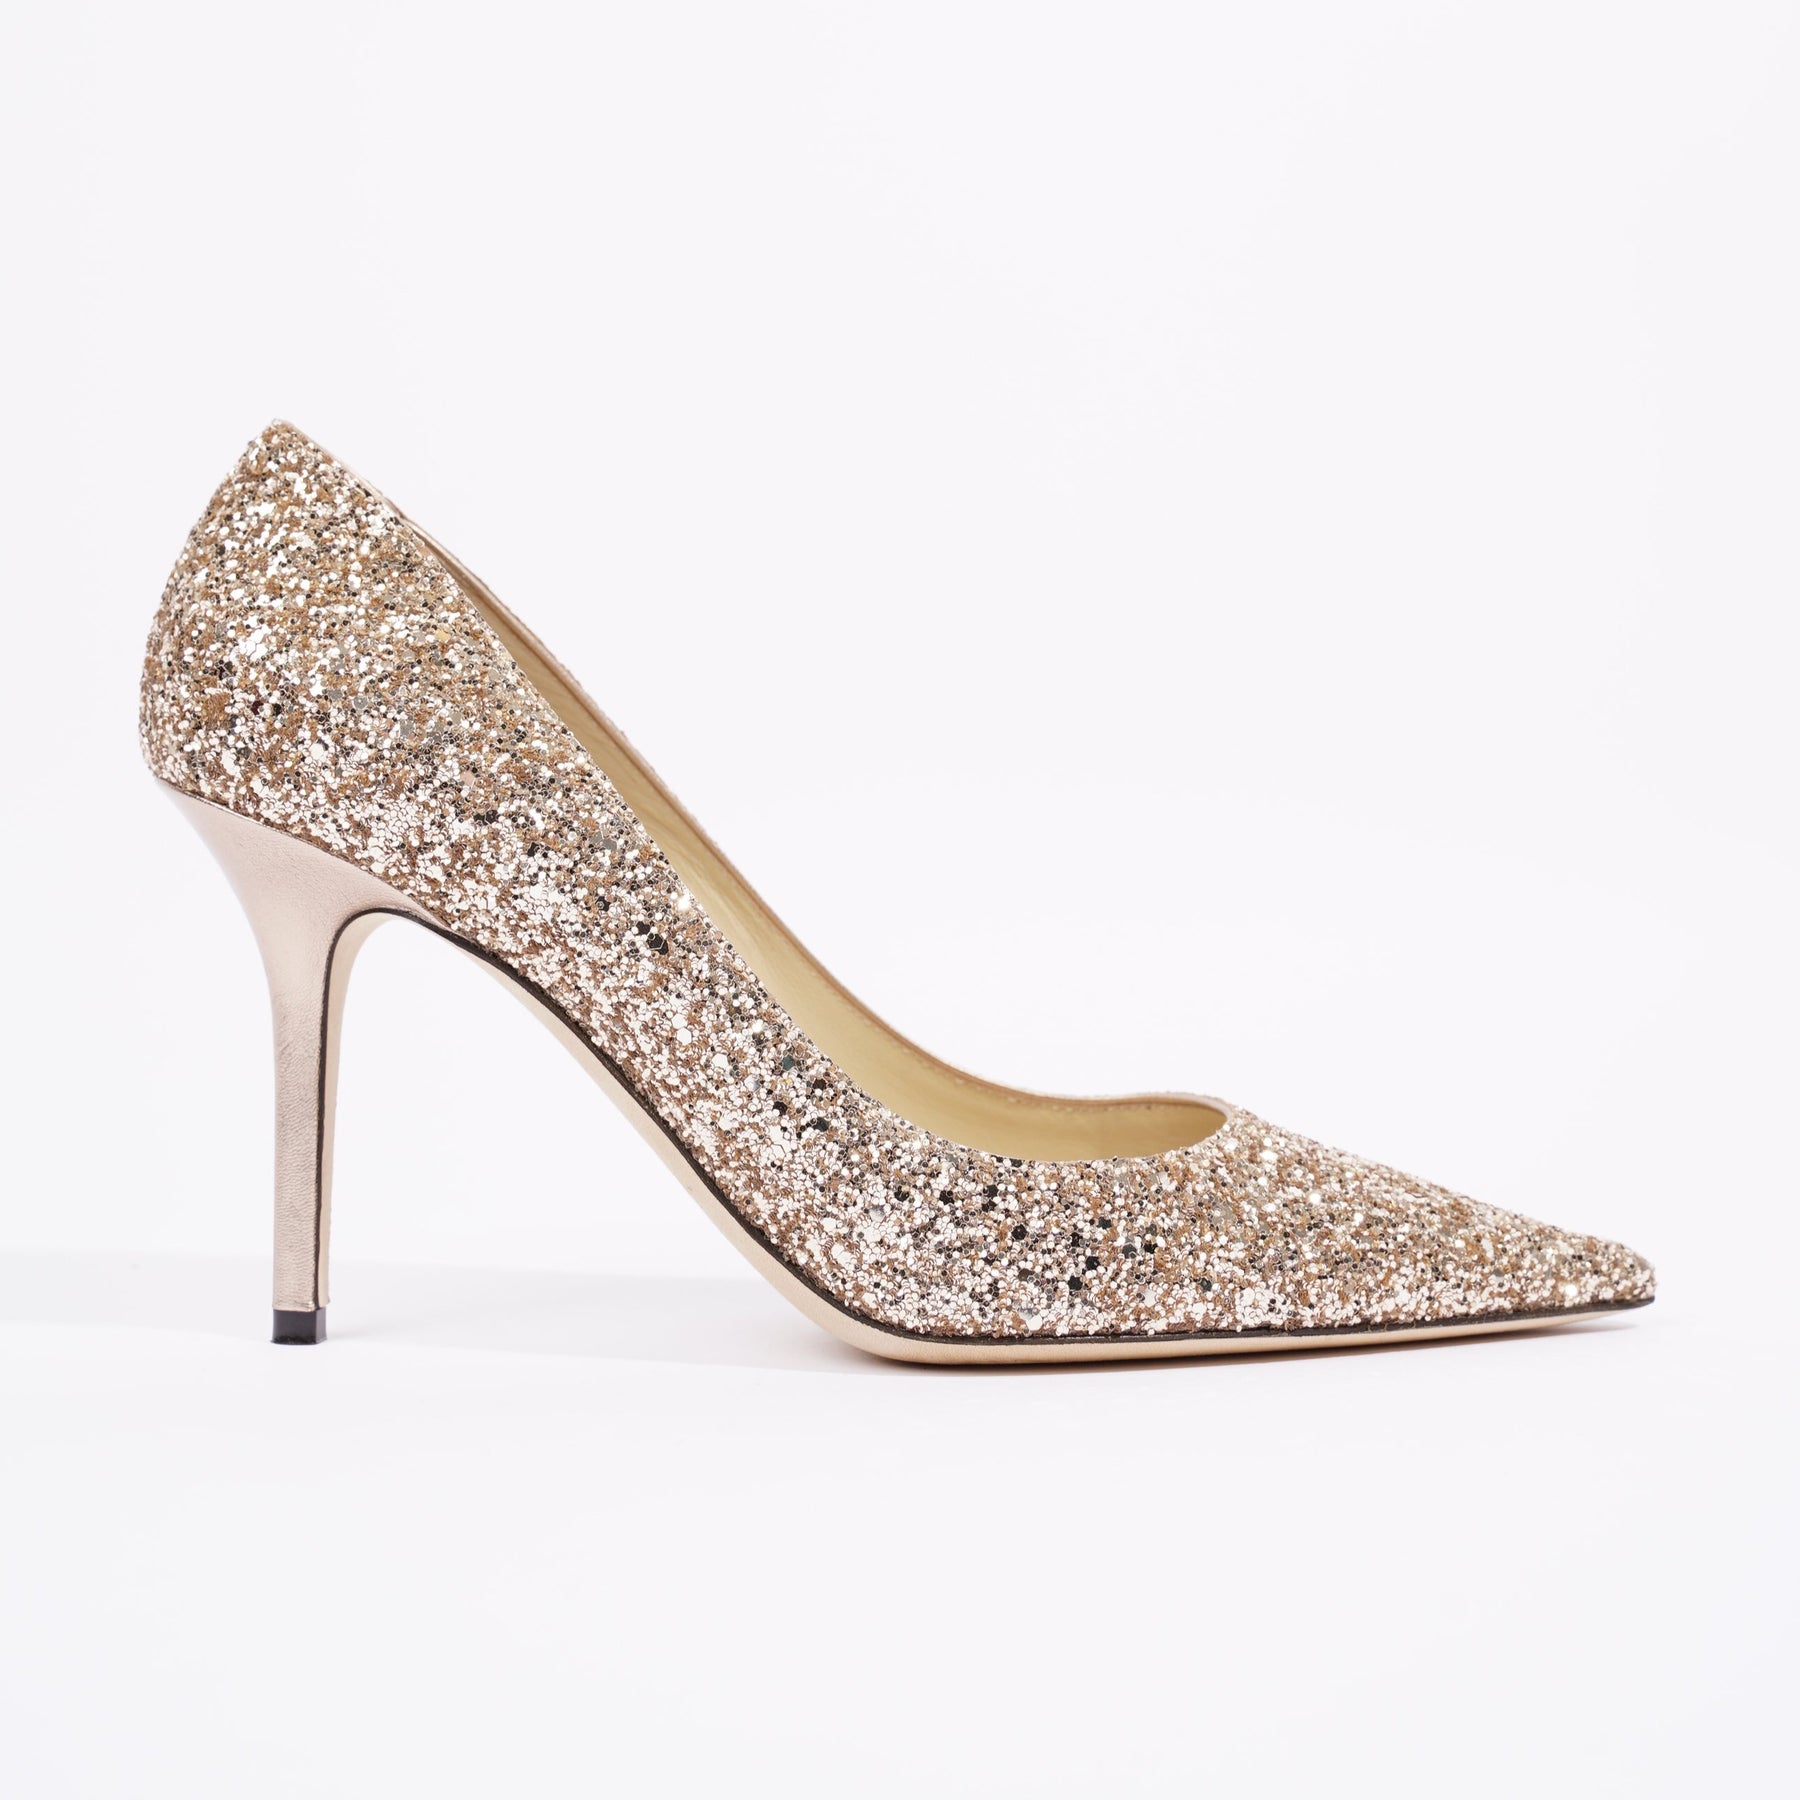 Gold Glitter Shoes 2678663 Ht Ml - Buy Gold Glitter Shoes 2678663 Ht Ml  online in India